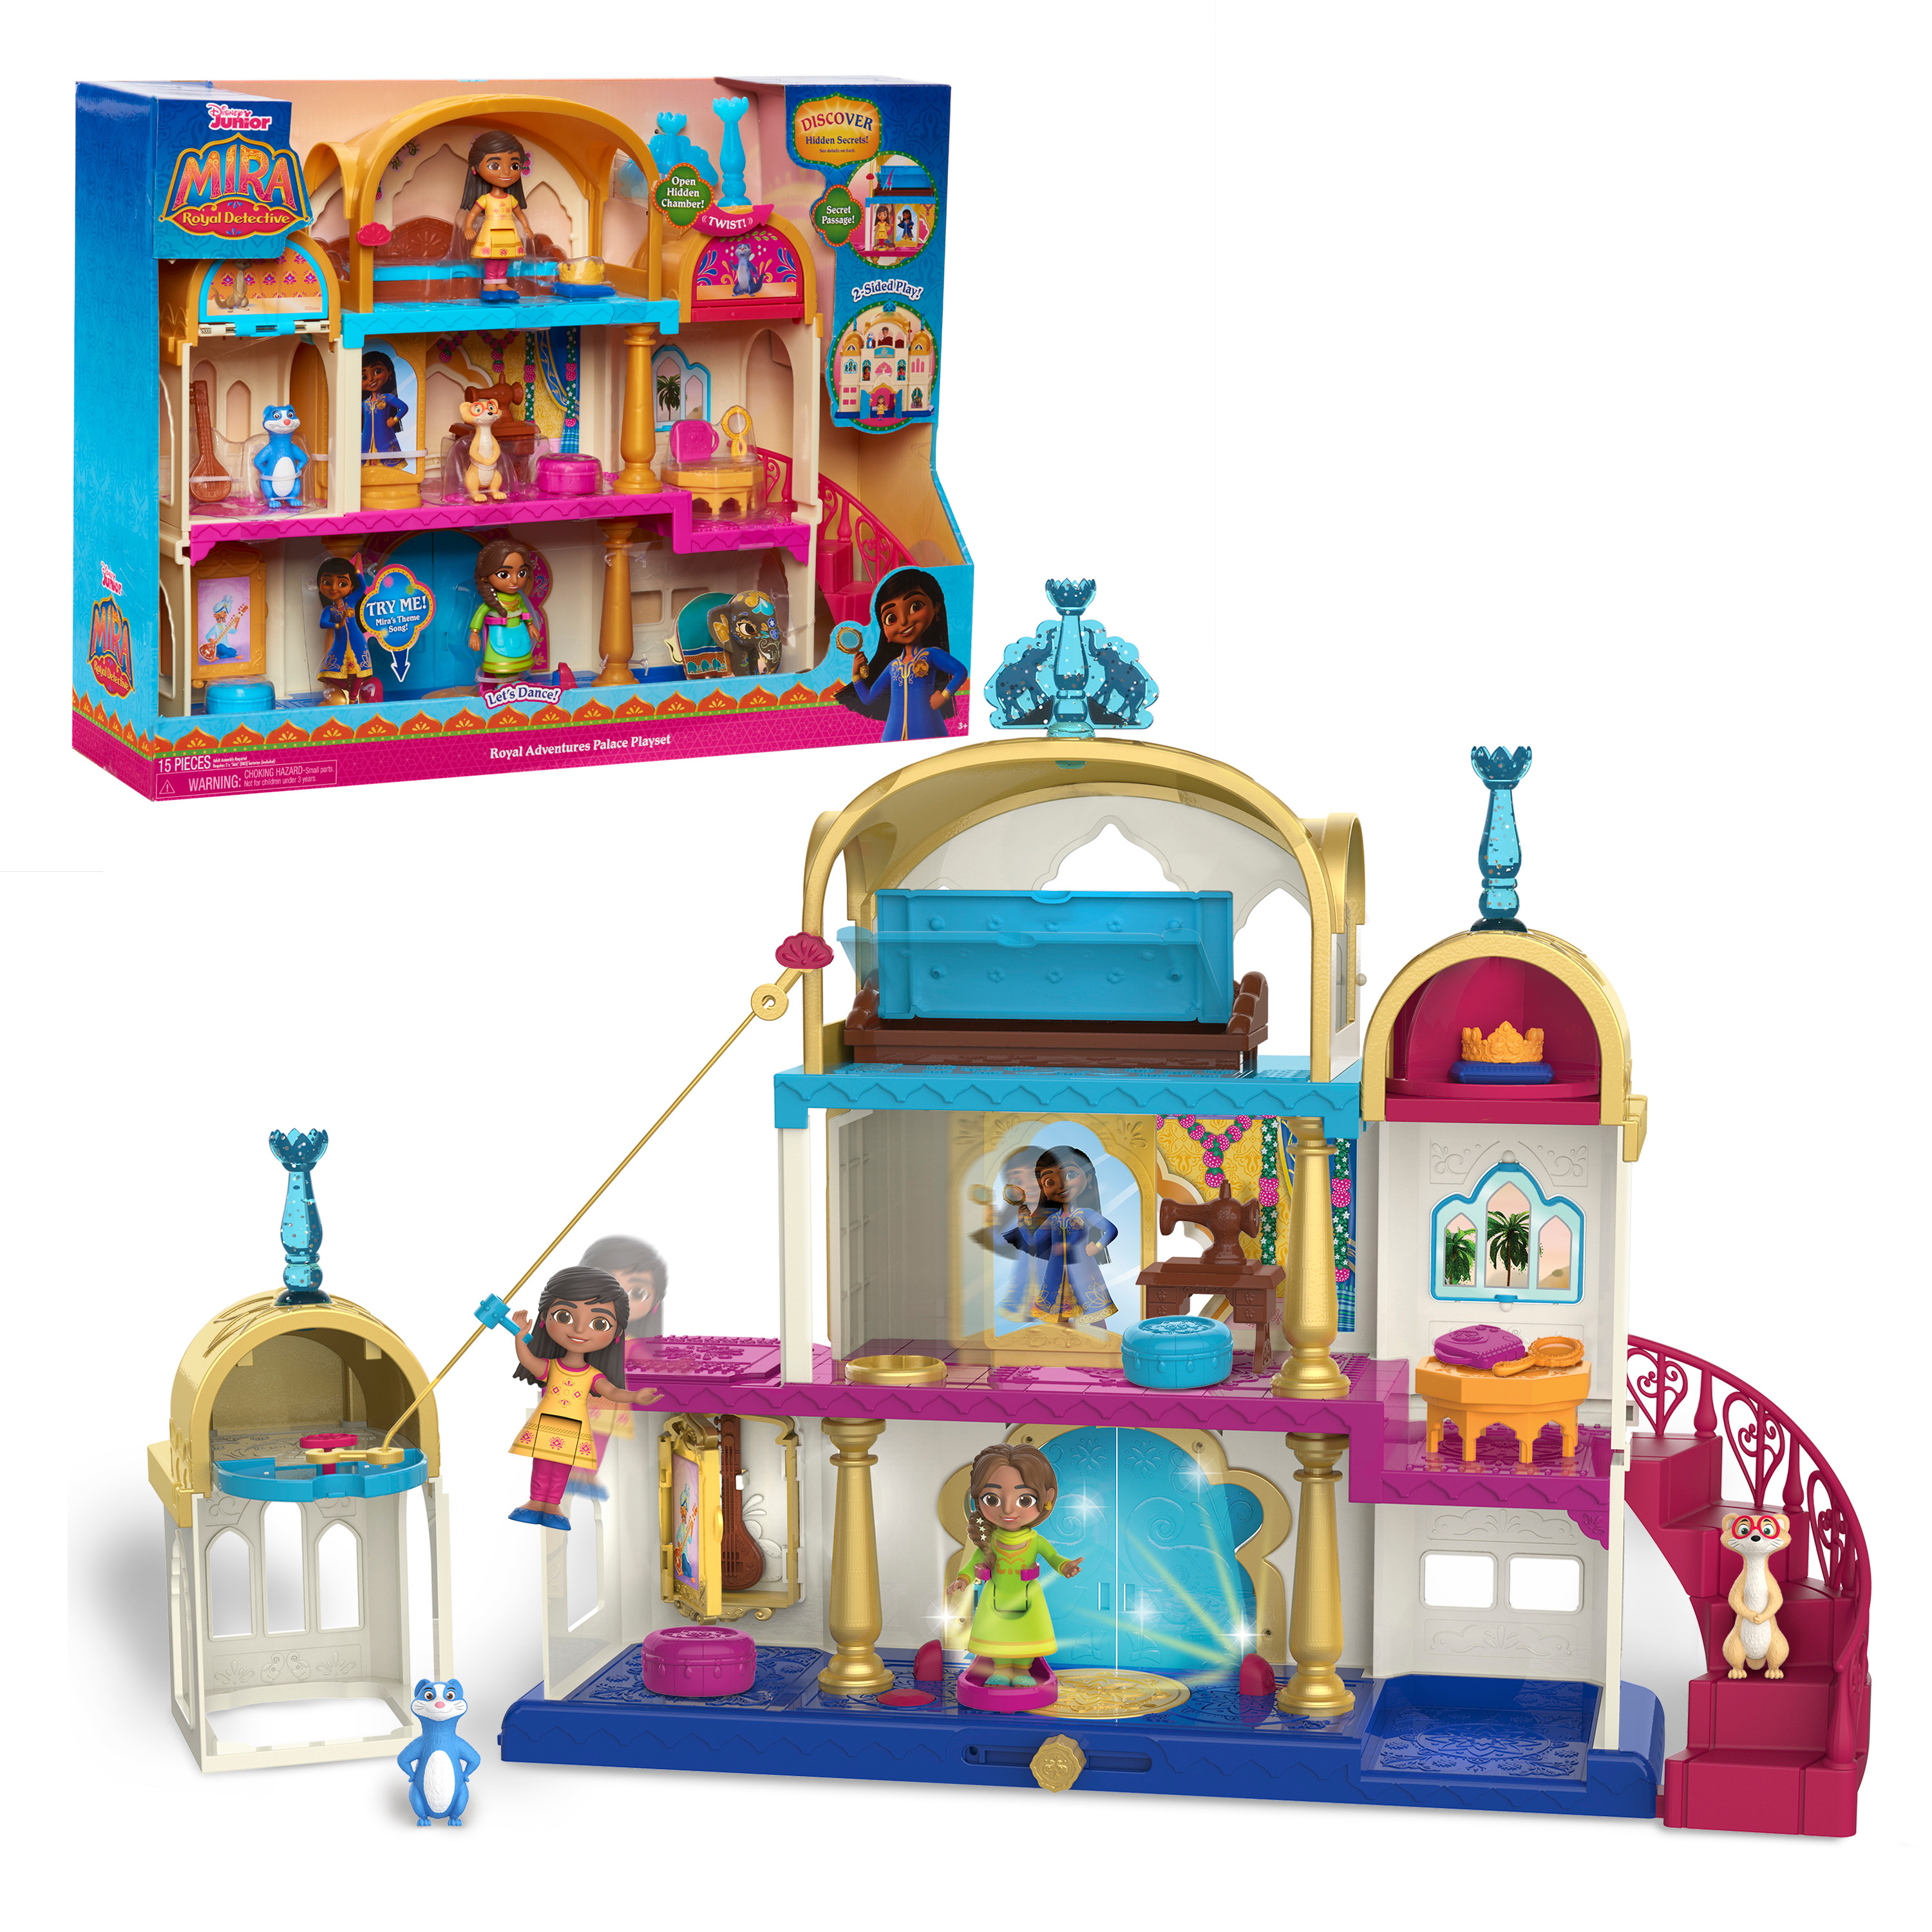 Disney Junior Royal Adventures Palace Playset, Officially Licensed Kids Toys for Ages 3 Up, Gifts and Presents - image 1 of 8